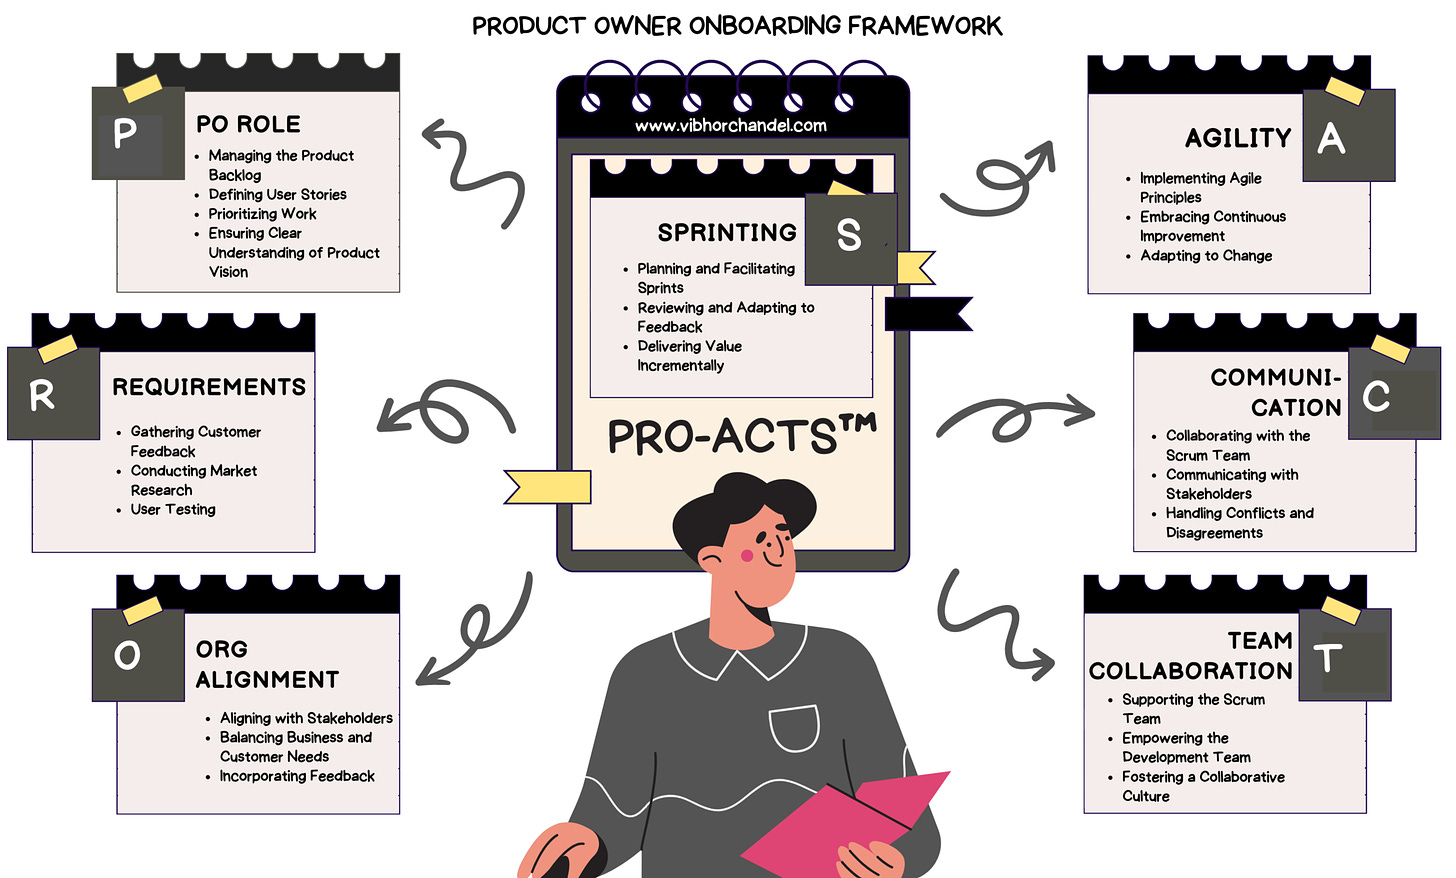 Product Owner Onboarding Framework - PROACTS - Vibhor Chandel